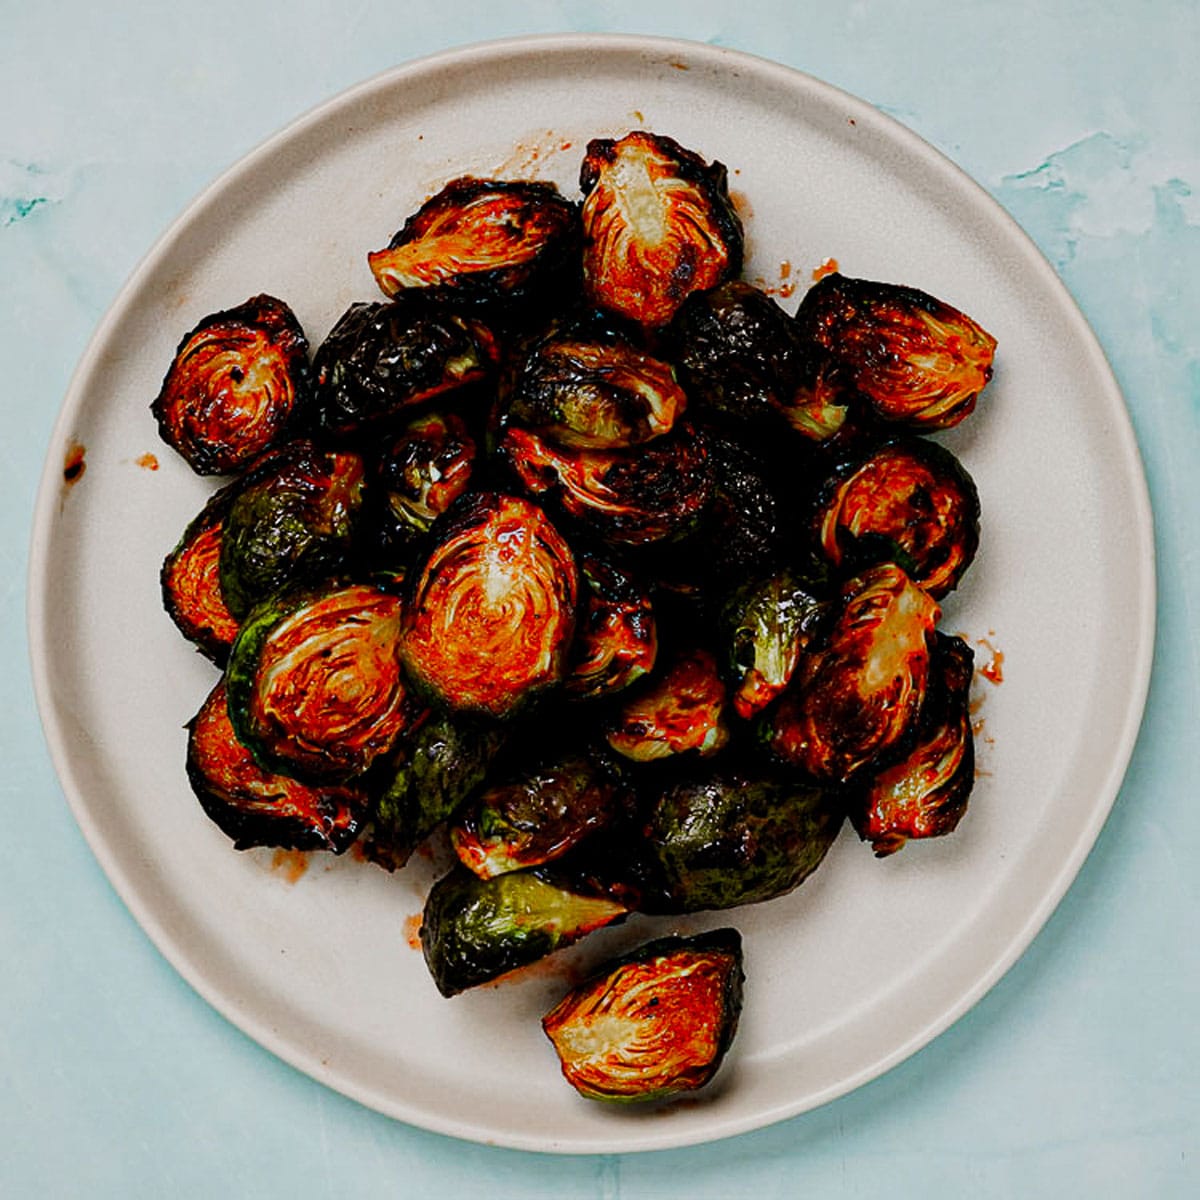 Honey sriracha Brussels sprouts air fryer recipe served in a white plate